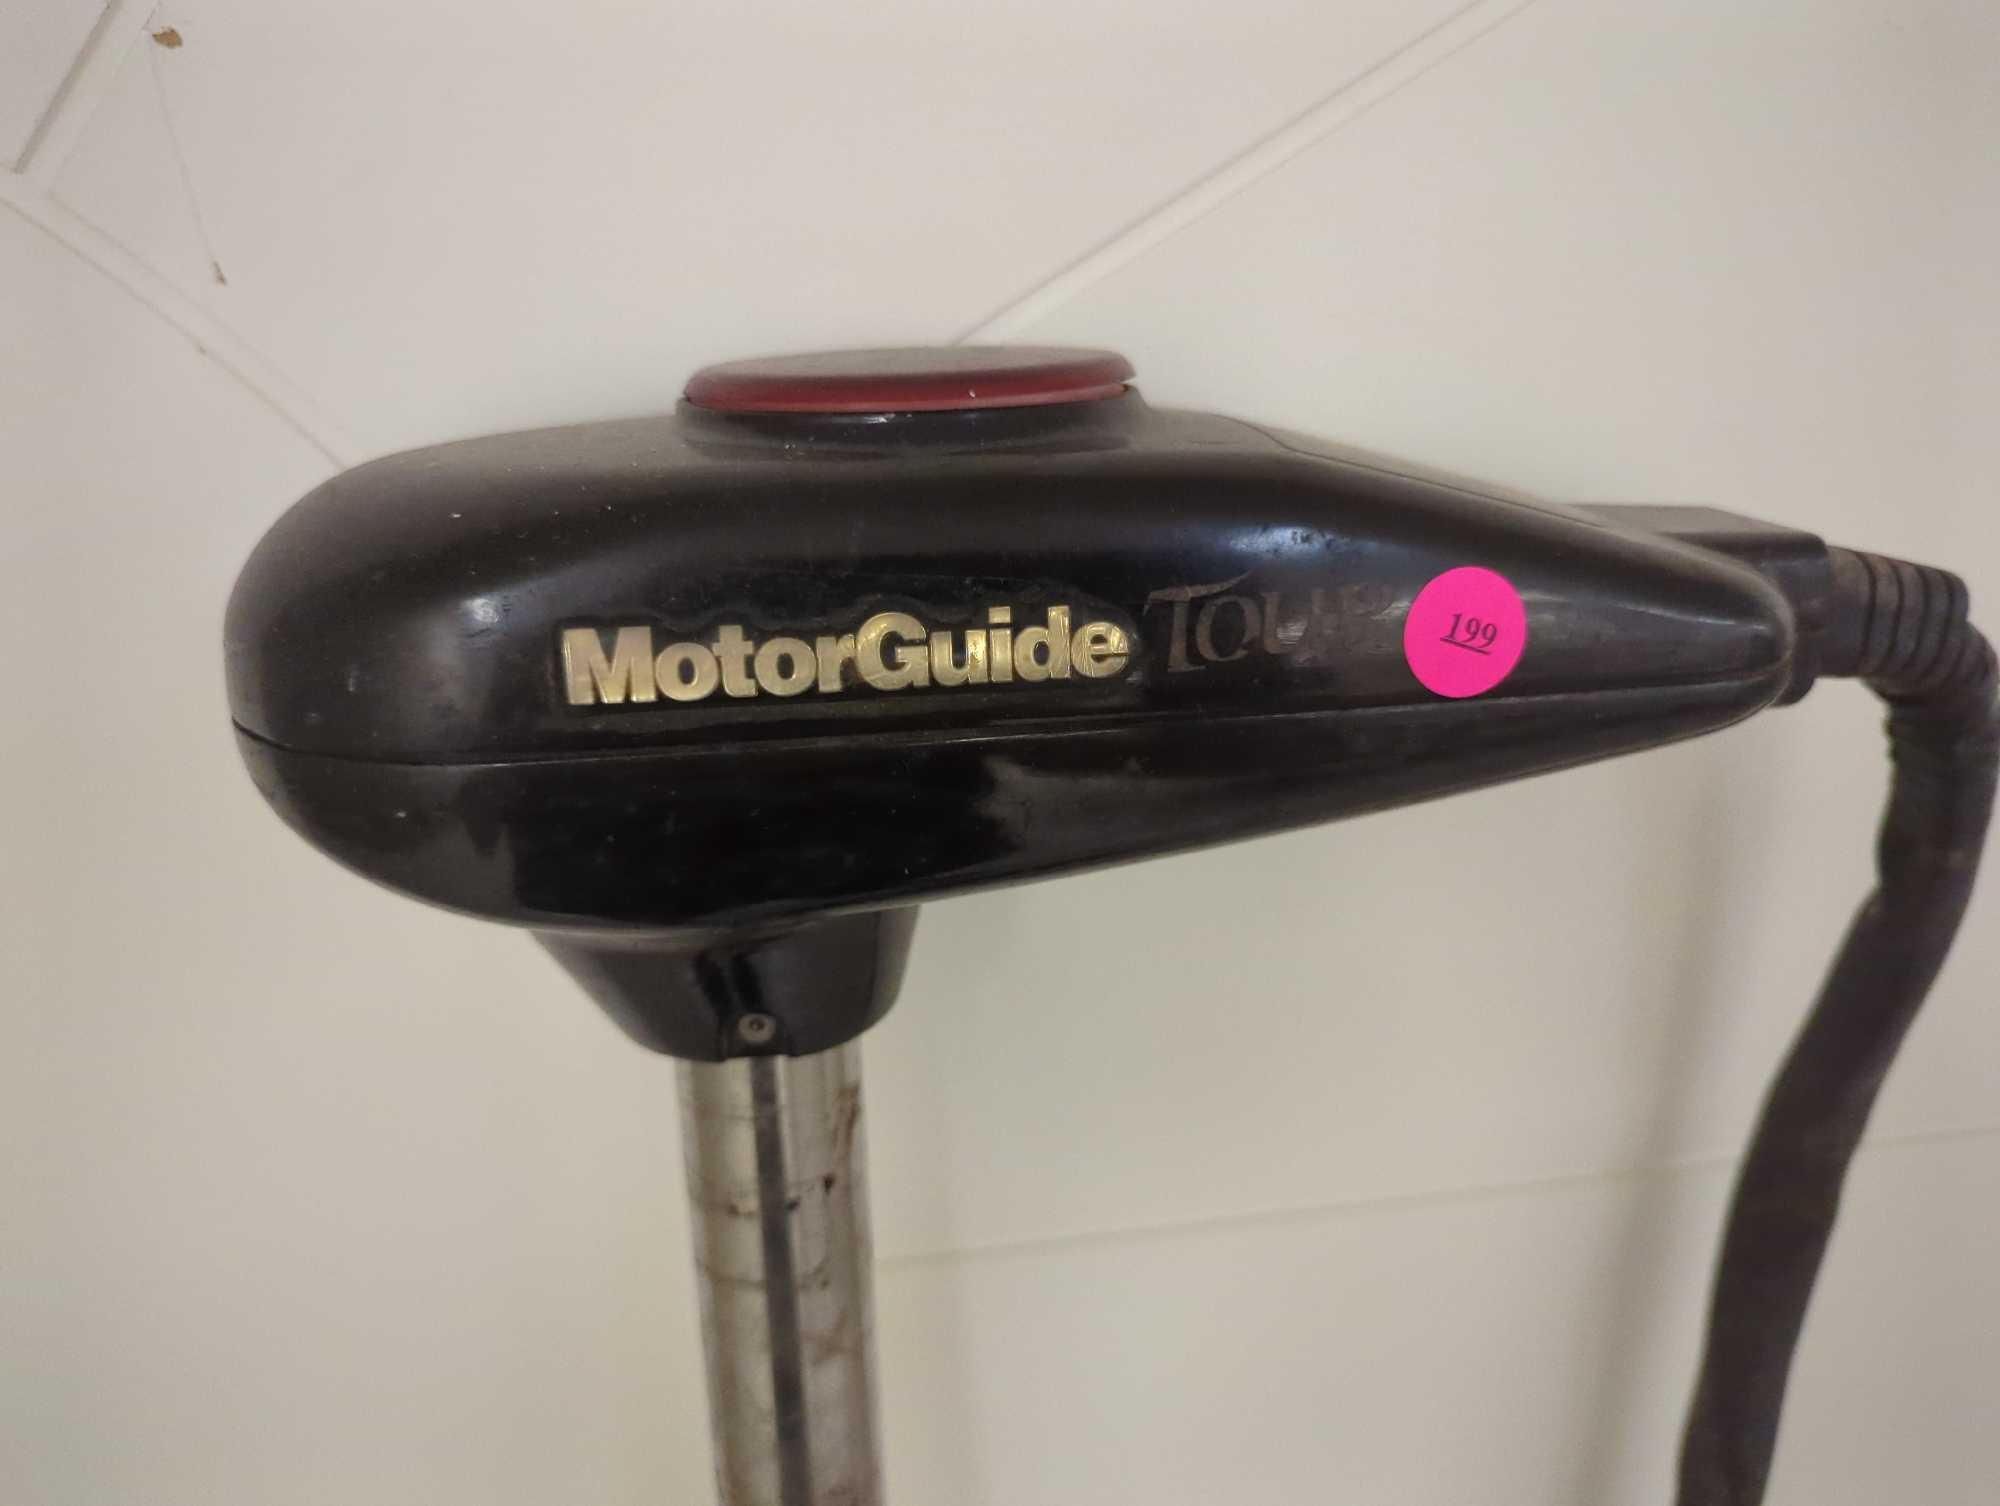 MotorGuide Tour Trolling motor. Comes as is shown in photos. Appears to be used.